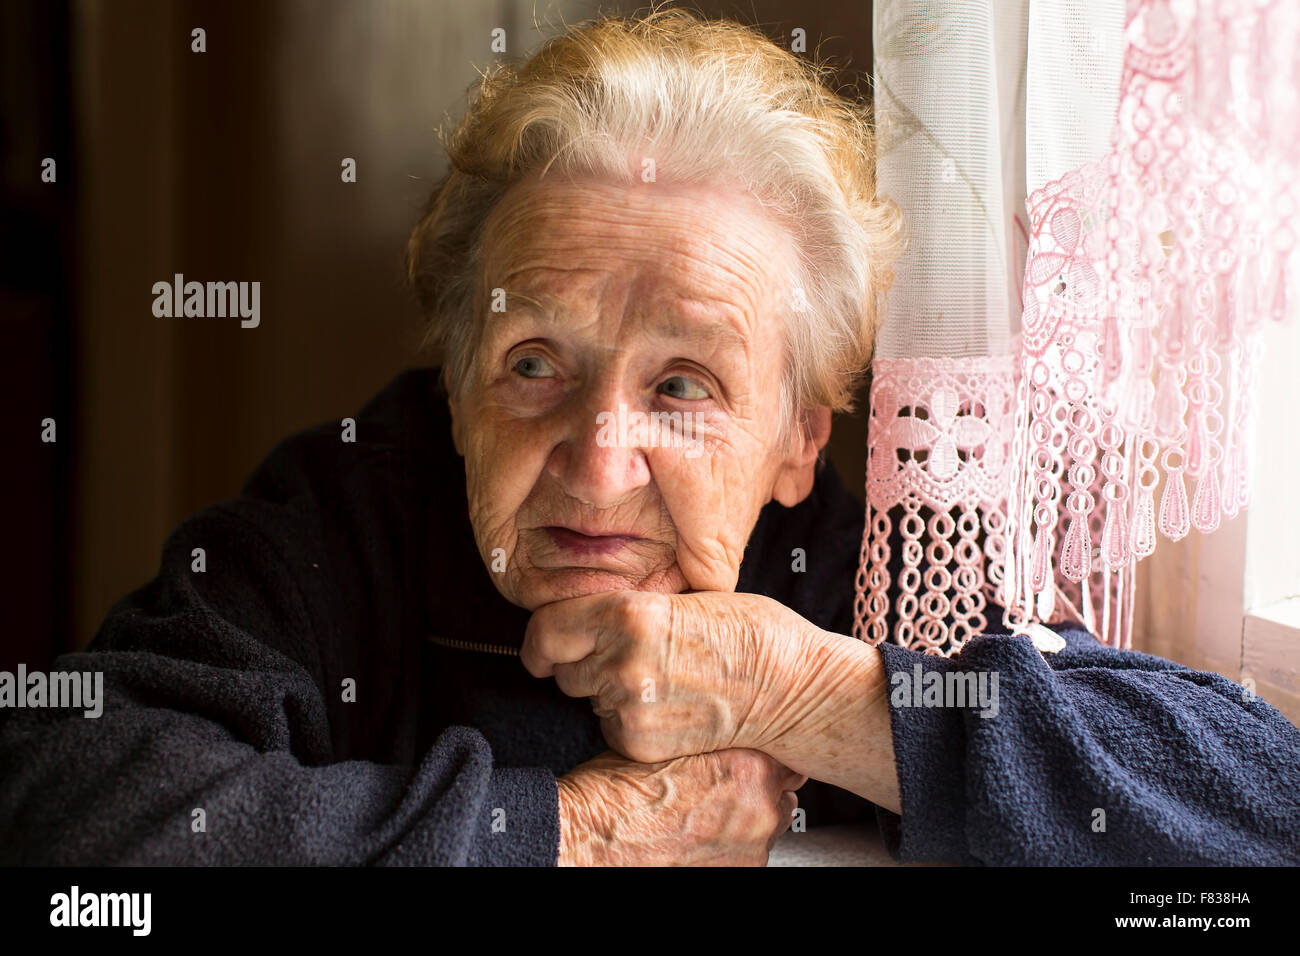 Old woman sitting near the window, a close-up portrait. Stock Photo